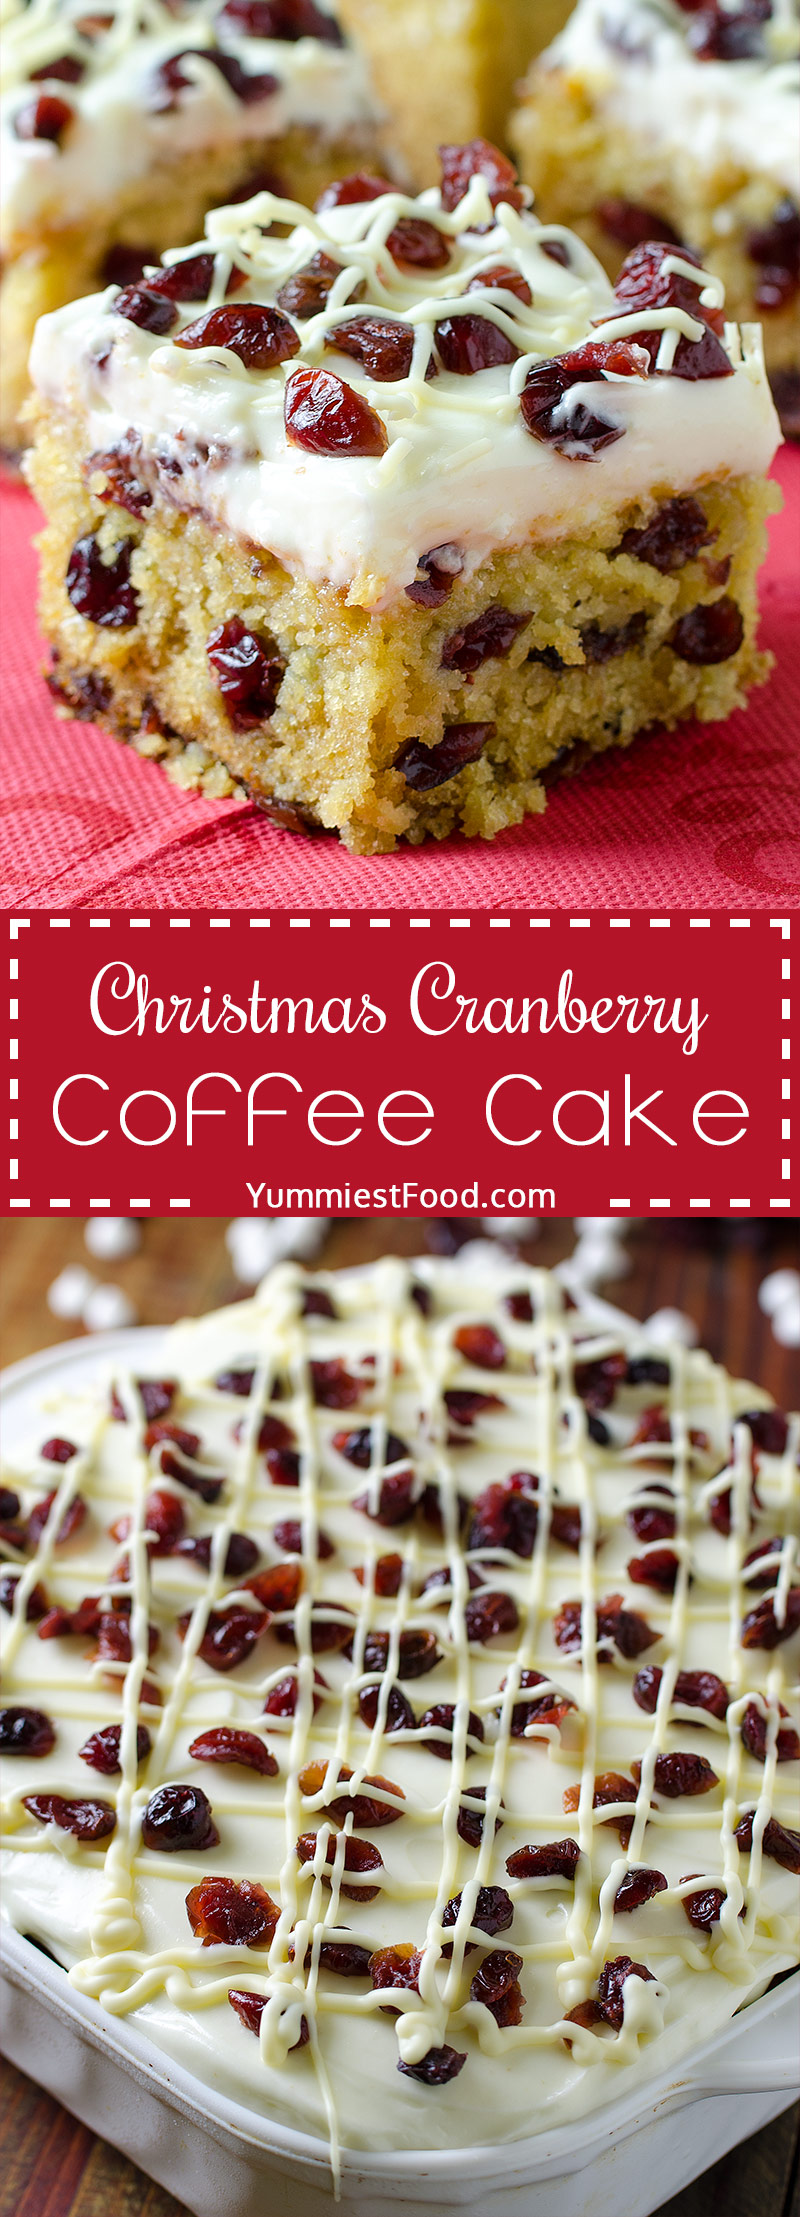 CHRISTMAS CRANBERRY COFFEE CAKE - Easy Cranberry Coffee Cake is perfect Christmas dessert! Loaded with cranberries and white chocolate chips and topped with cream cheese frosting is a family favorite!